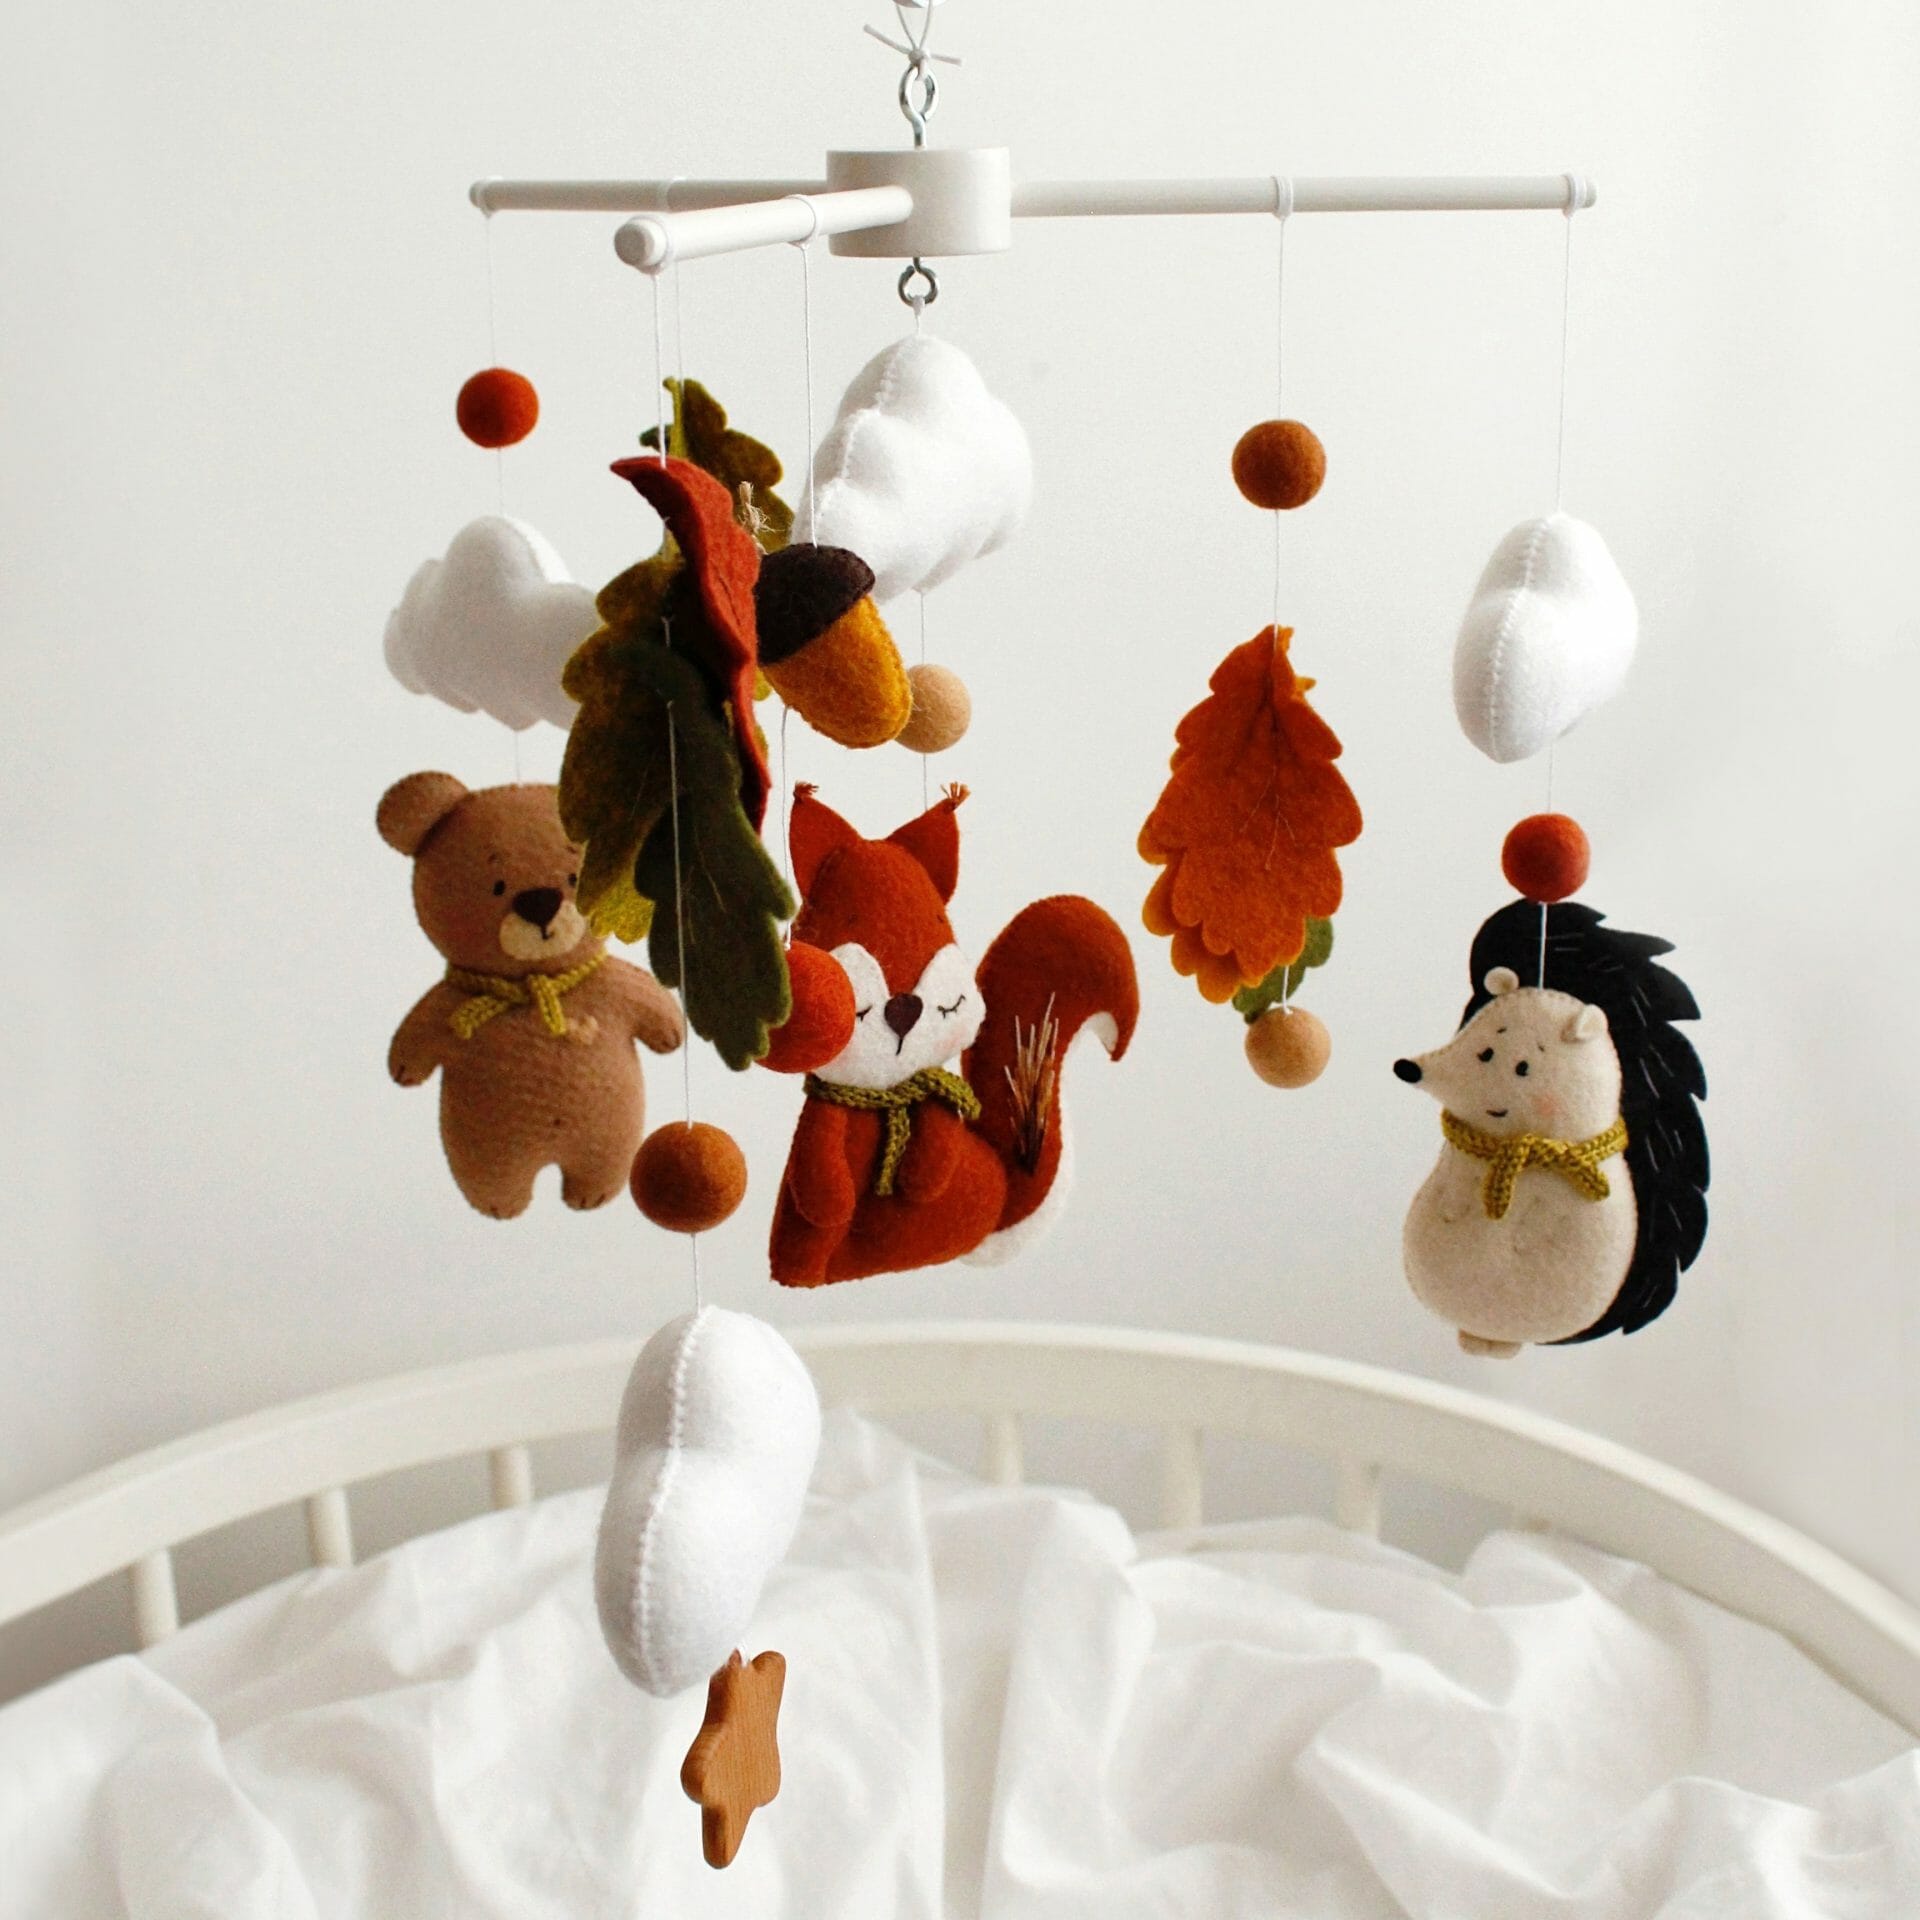 Hanging over the baby cot autumn forest woodland nursery crib mobile with cute squirrel, bear, hedgehog, many leaves and clouds.